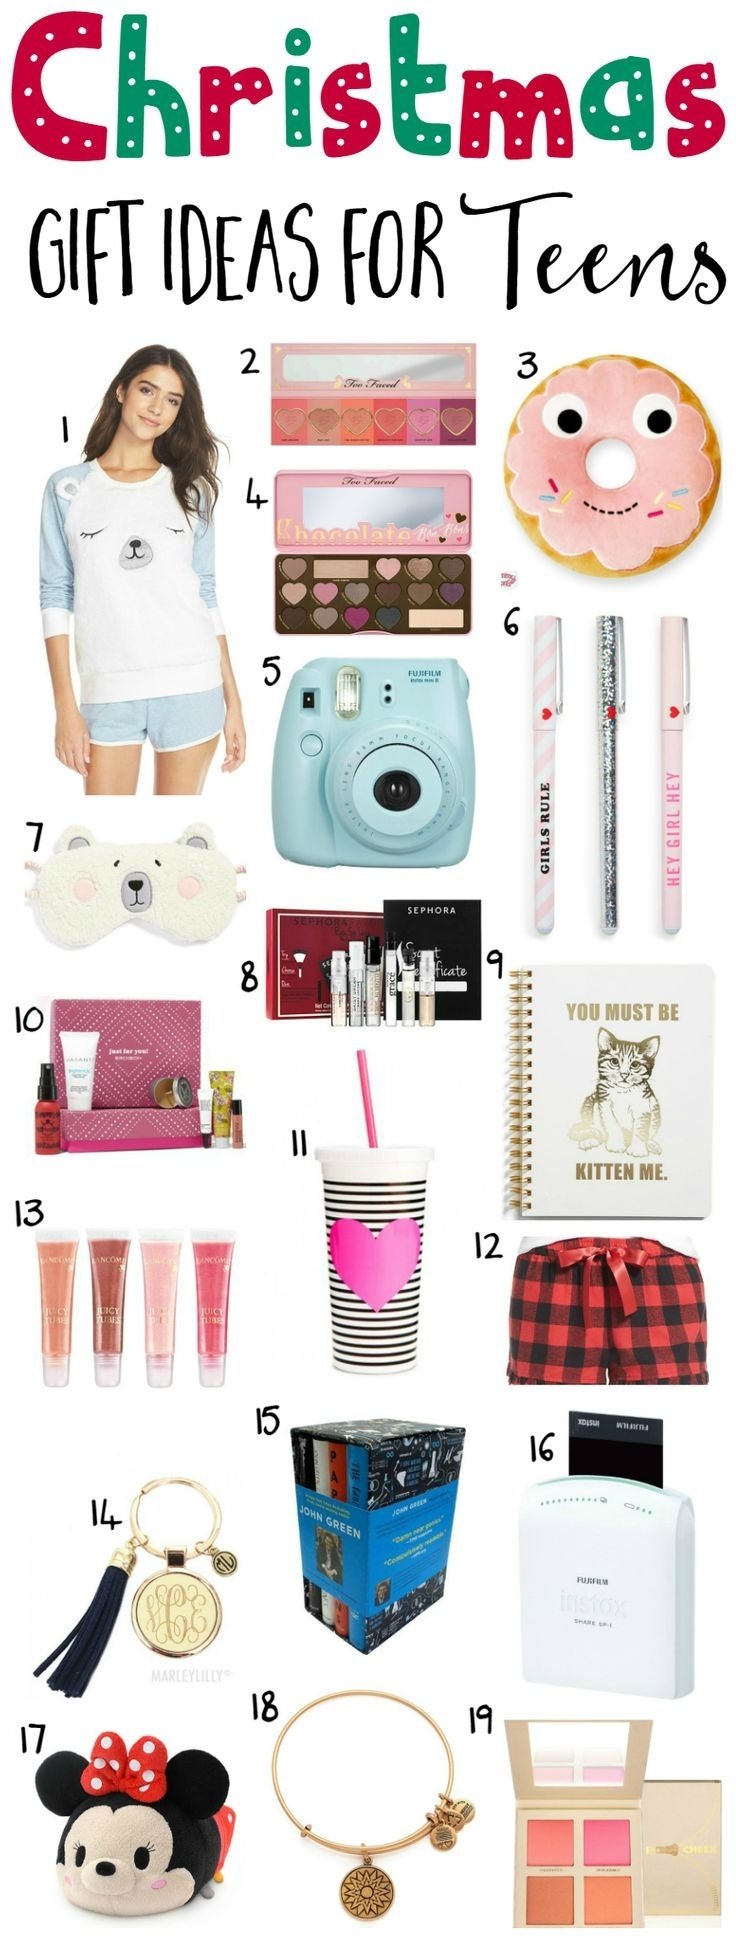 10 Most Popular Cheap Gift Ideas For Teenage Girls 11 best gift guide for teens images on pinterest gift ideas 2 2022